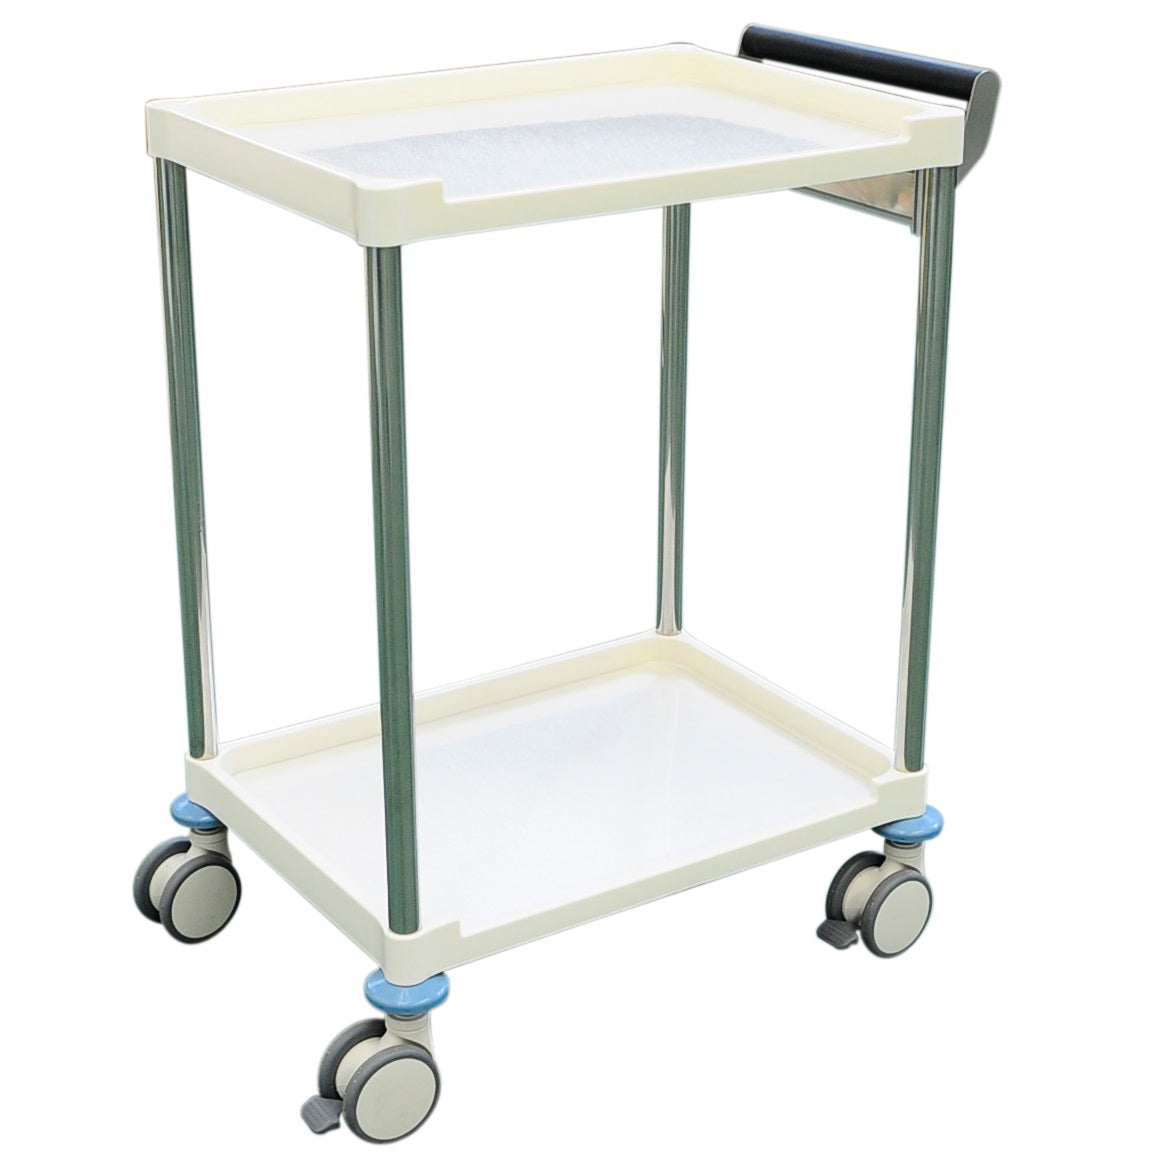 A strong ABS instrument trolley for transport of goods and equipment throughout healthcare facilities.